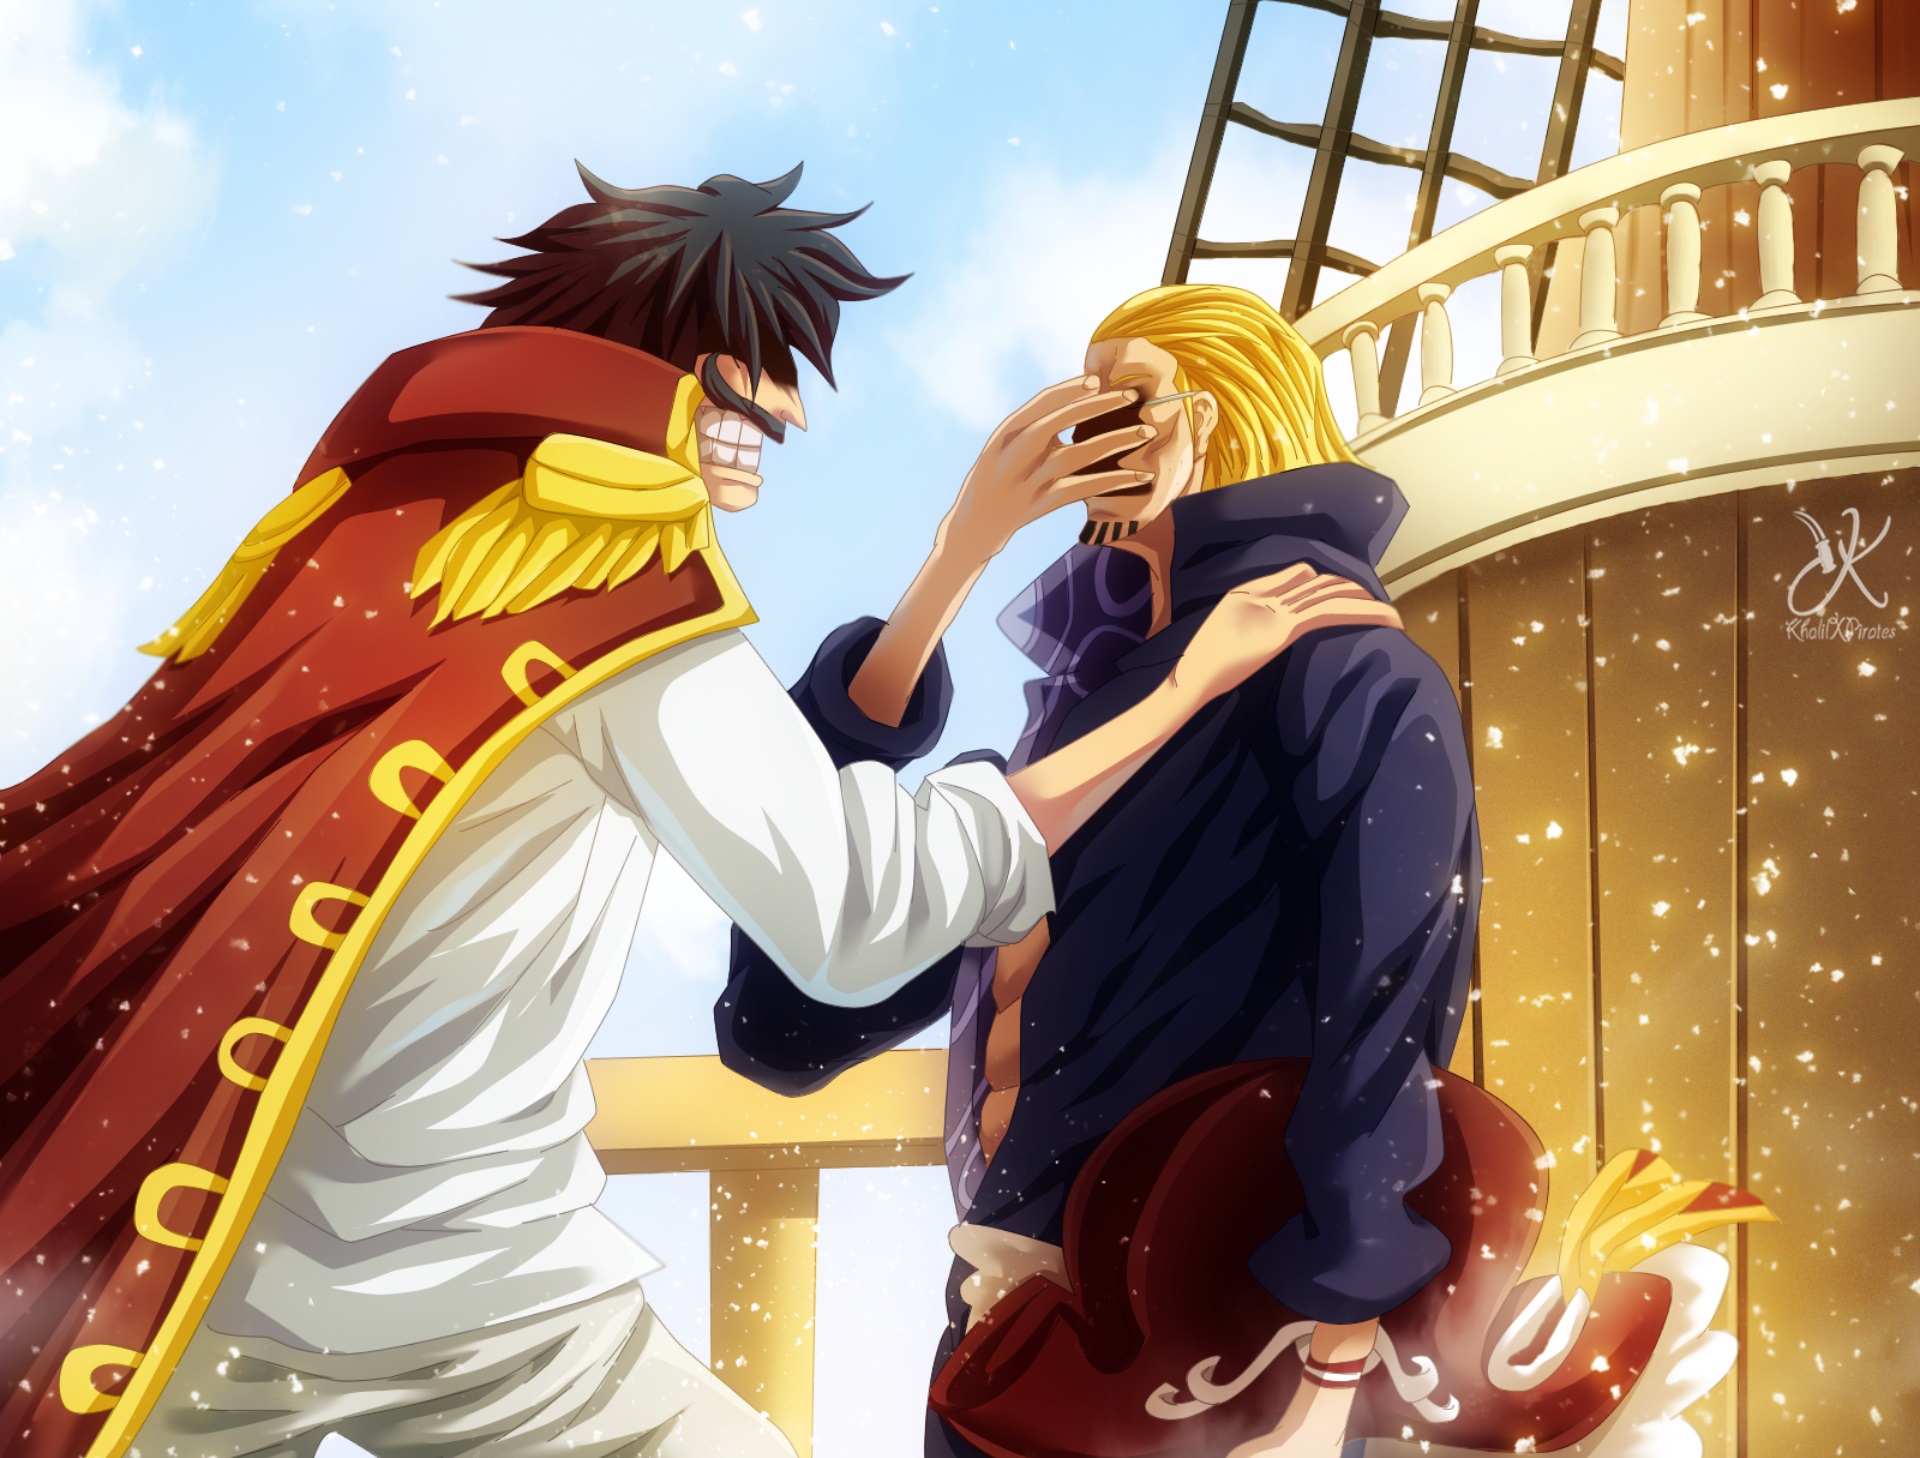 Anime One Piece HD Wallpaper by KhalilXPirates